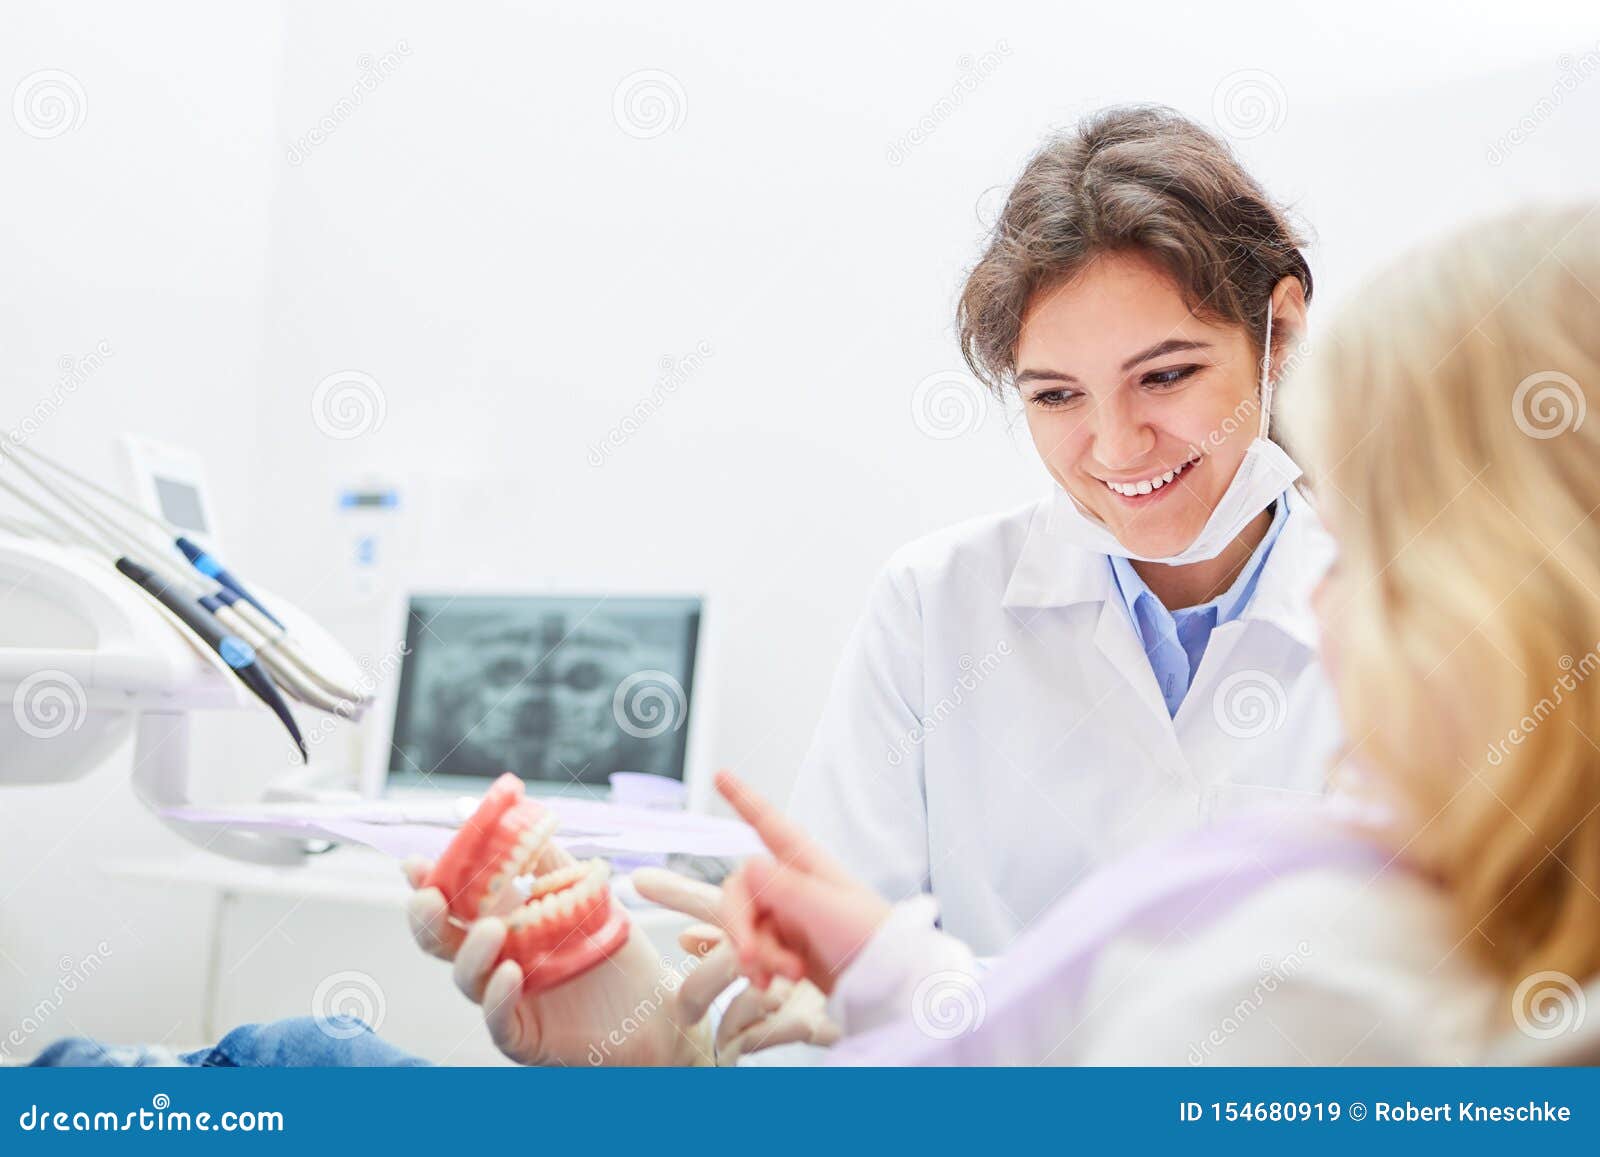 Dentist Shows Child the Model of a Denture Stock Image - Image of ...